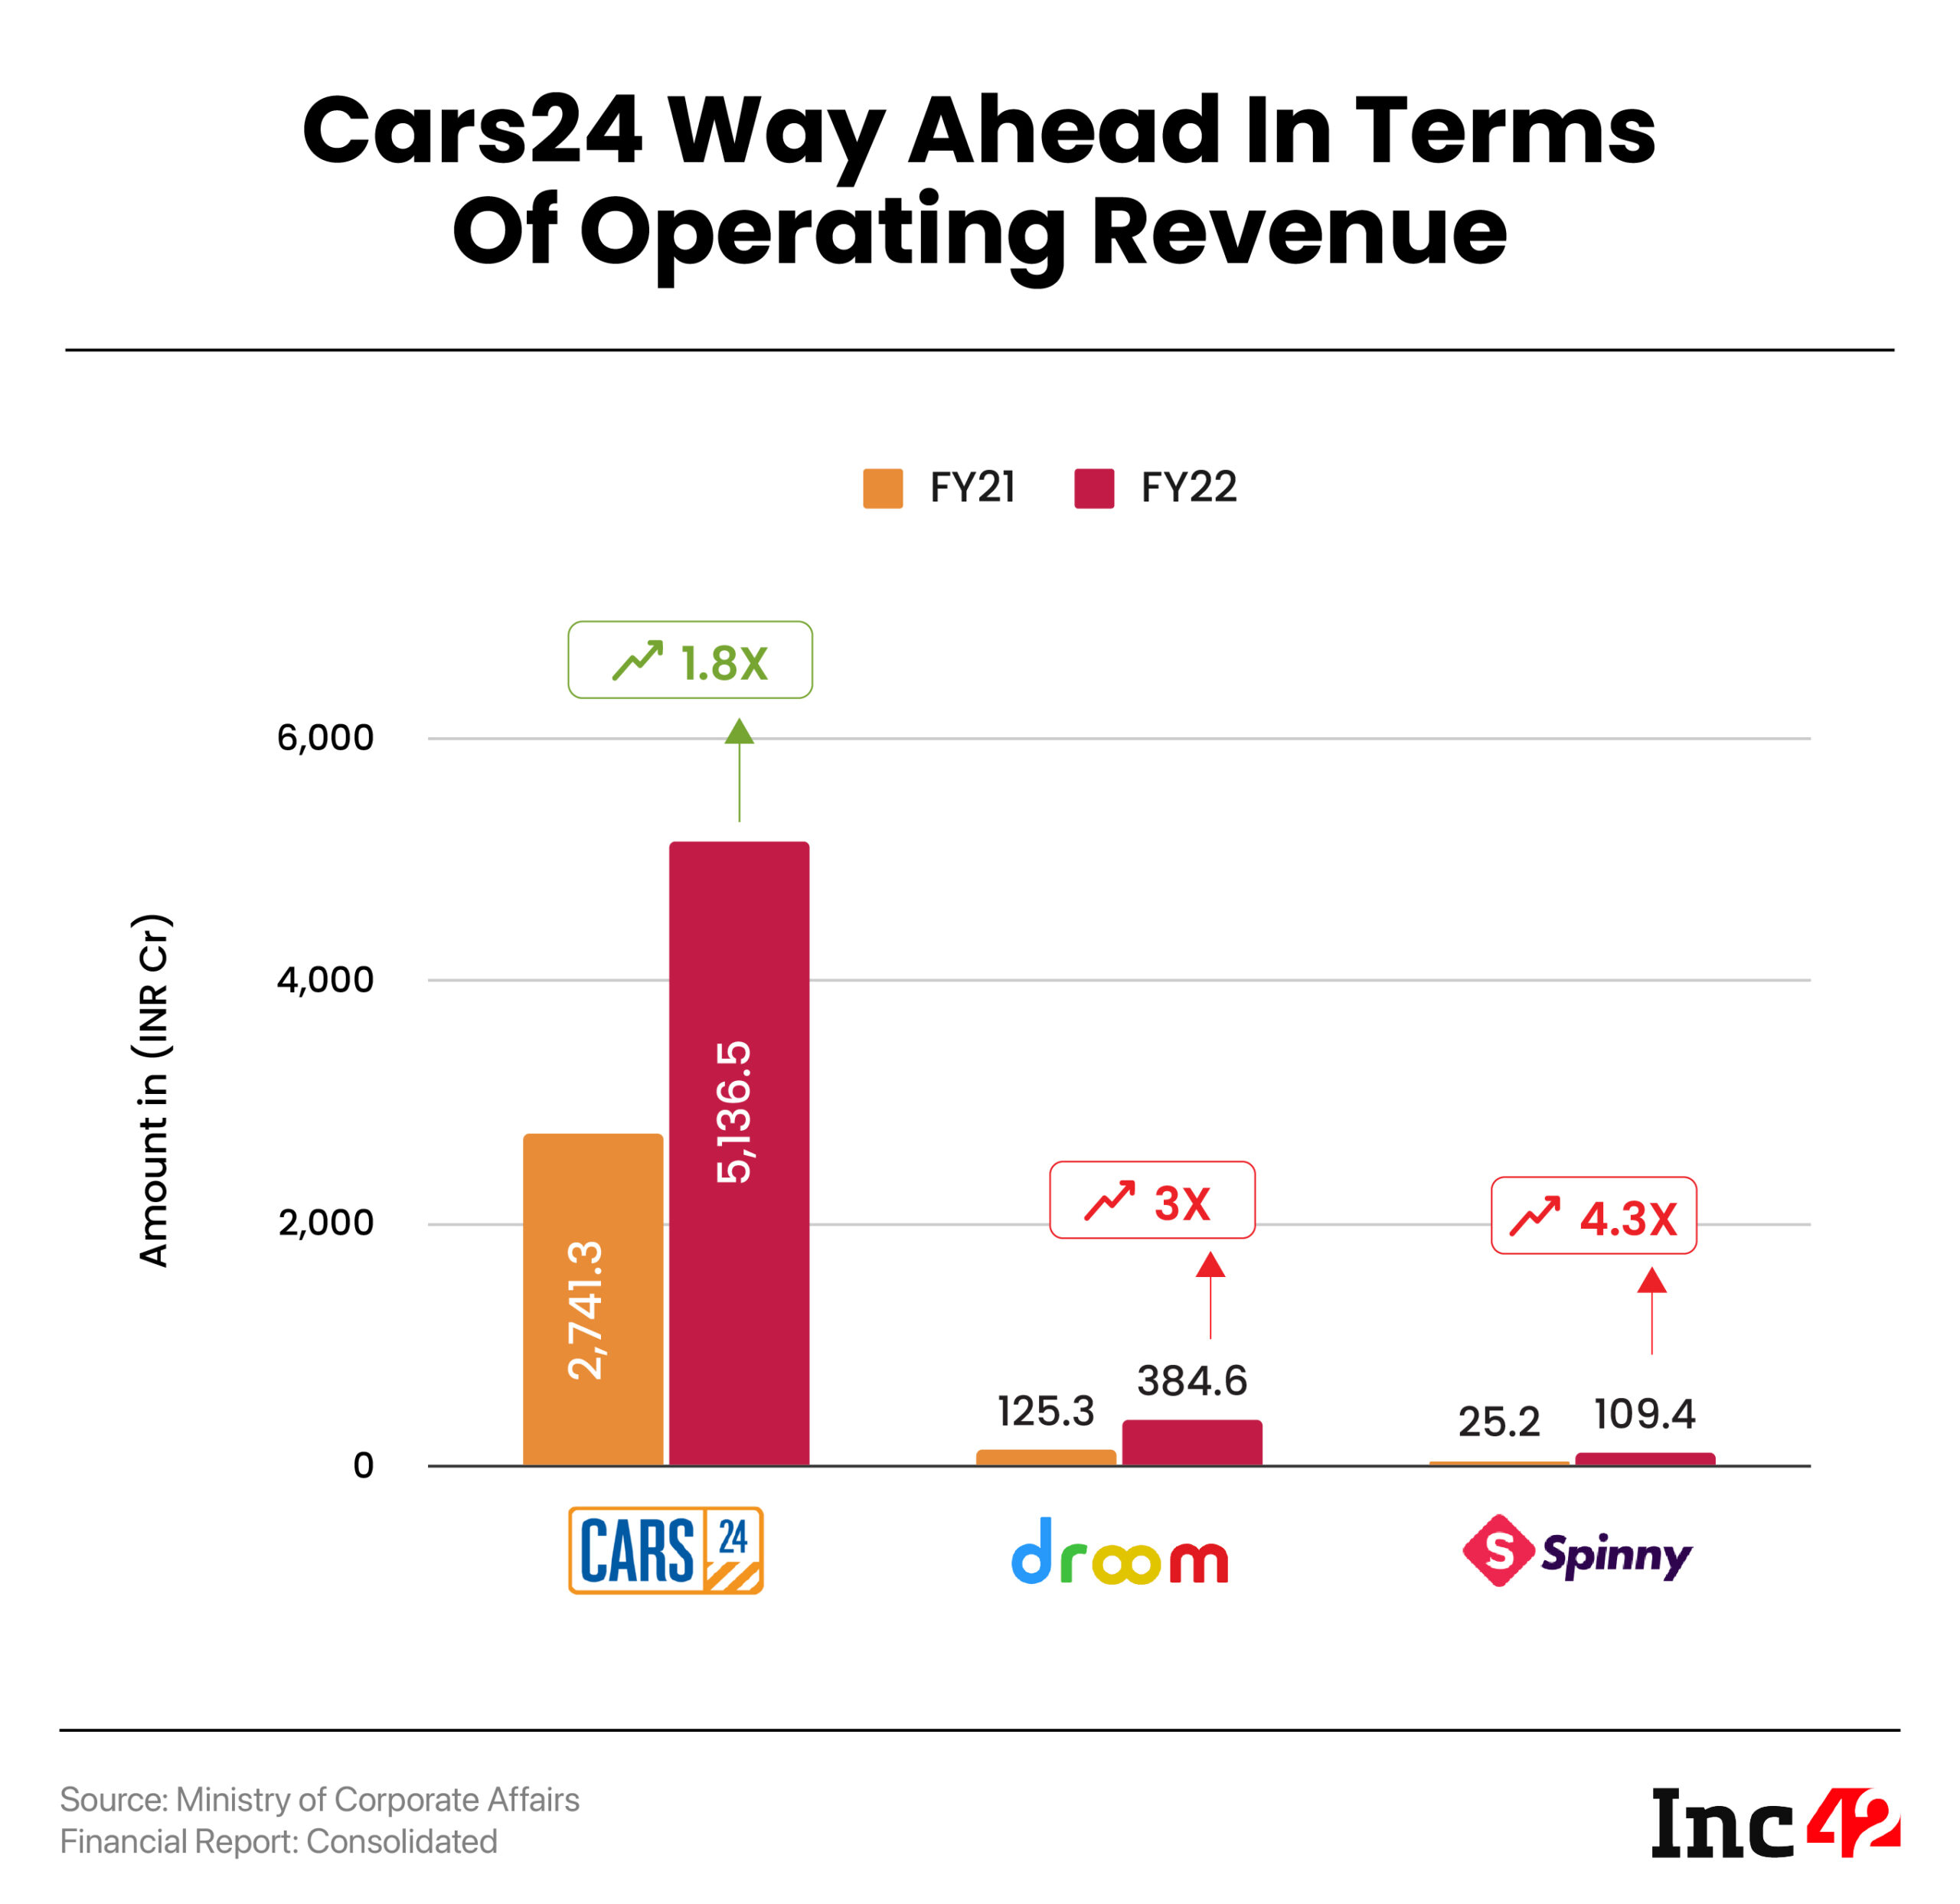 How Financials Of CARS24, Spinny & Droom Stack Against Each Other